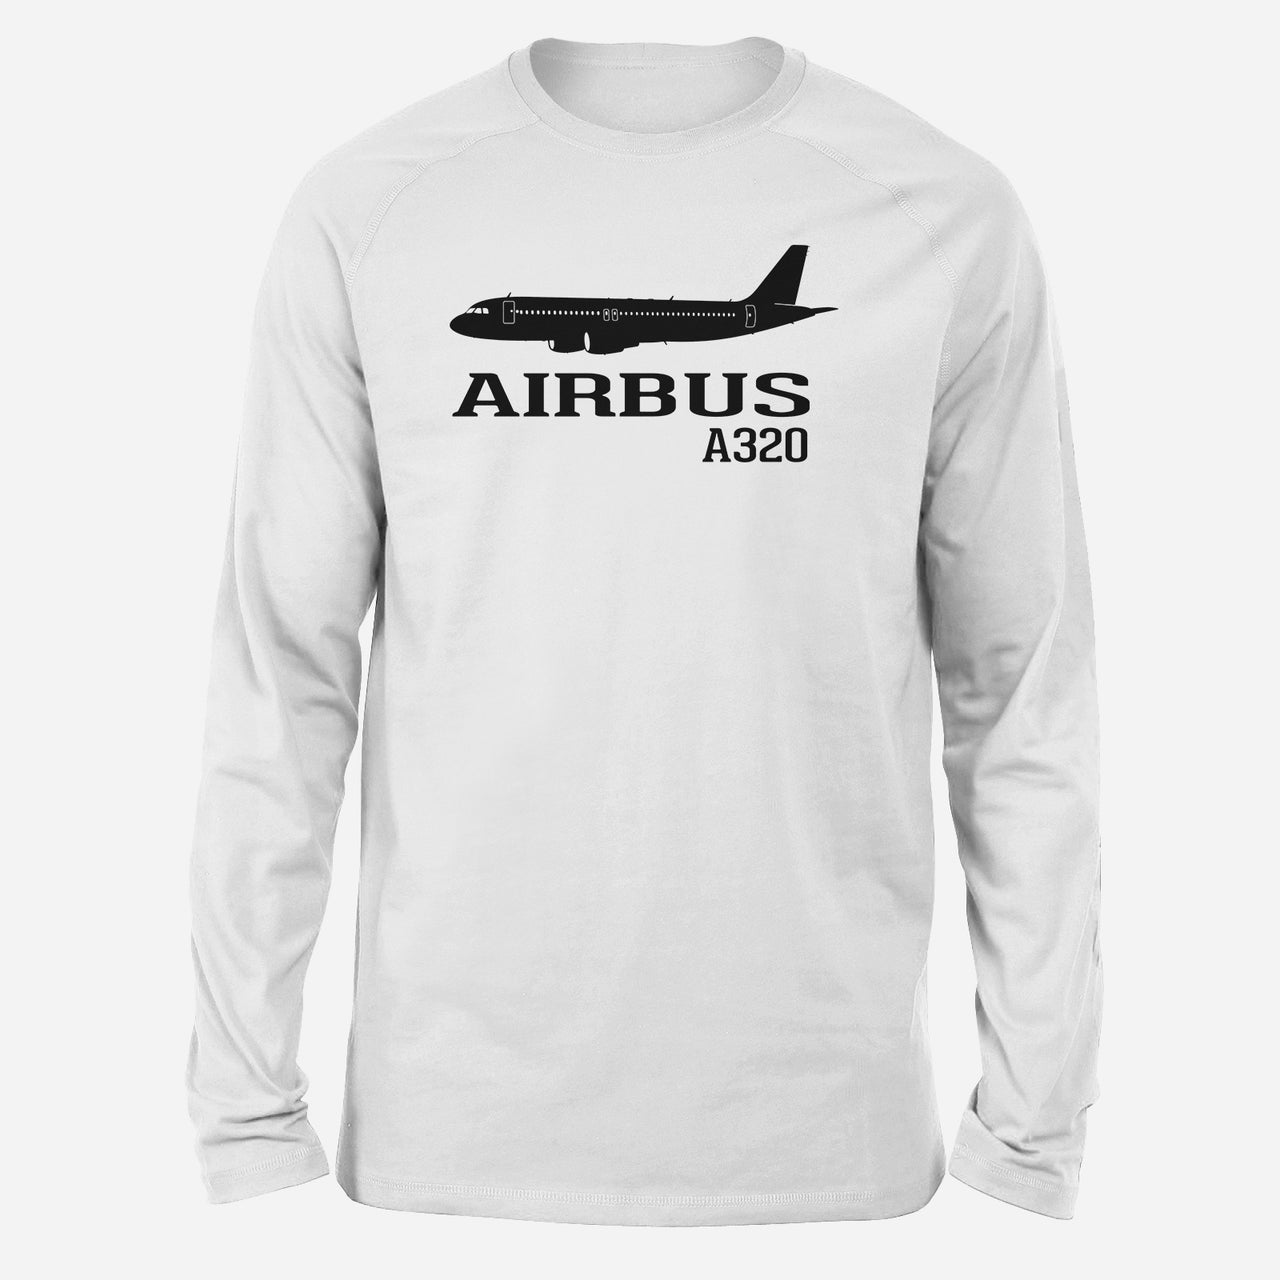 Airbus A320 Printed Designed Long-Sleeve T-Shirts